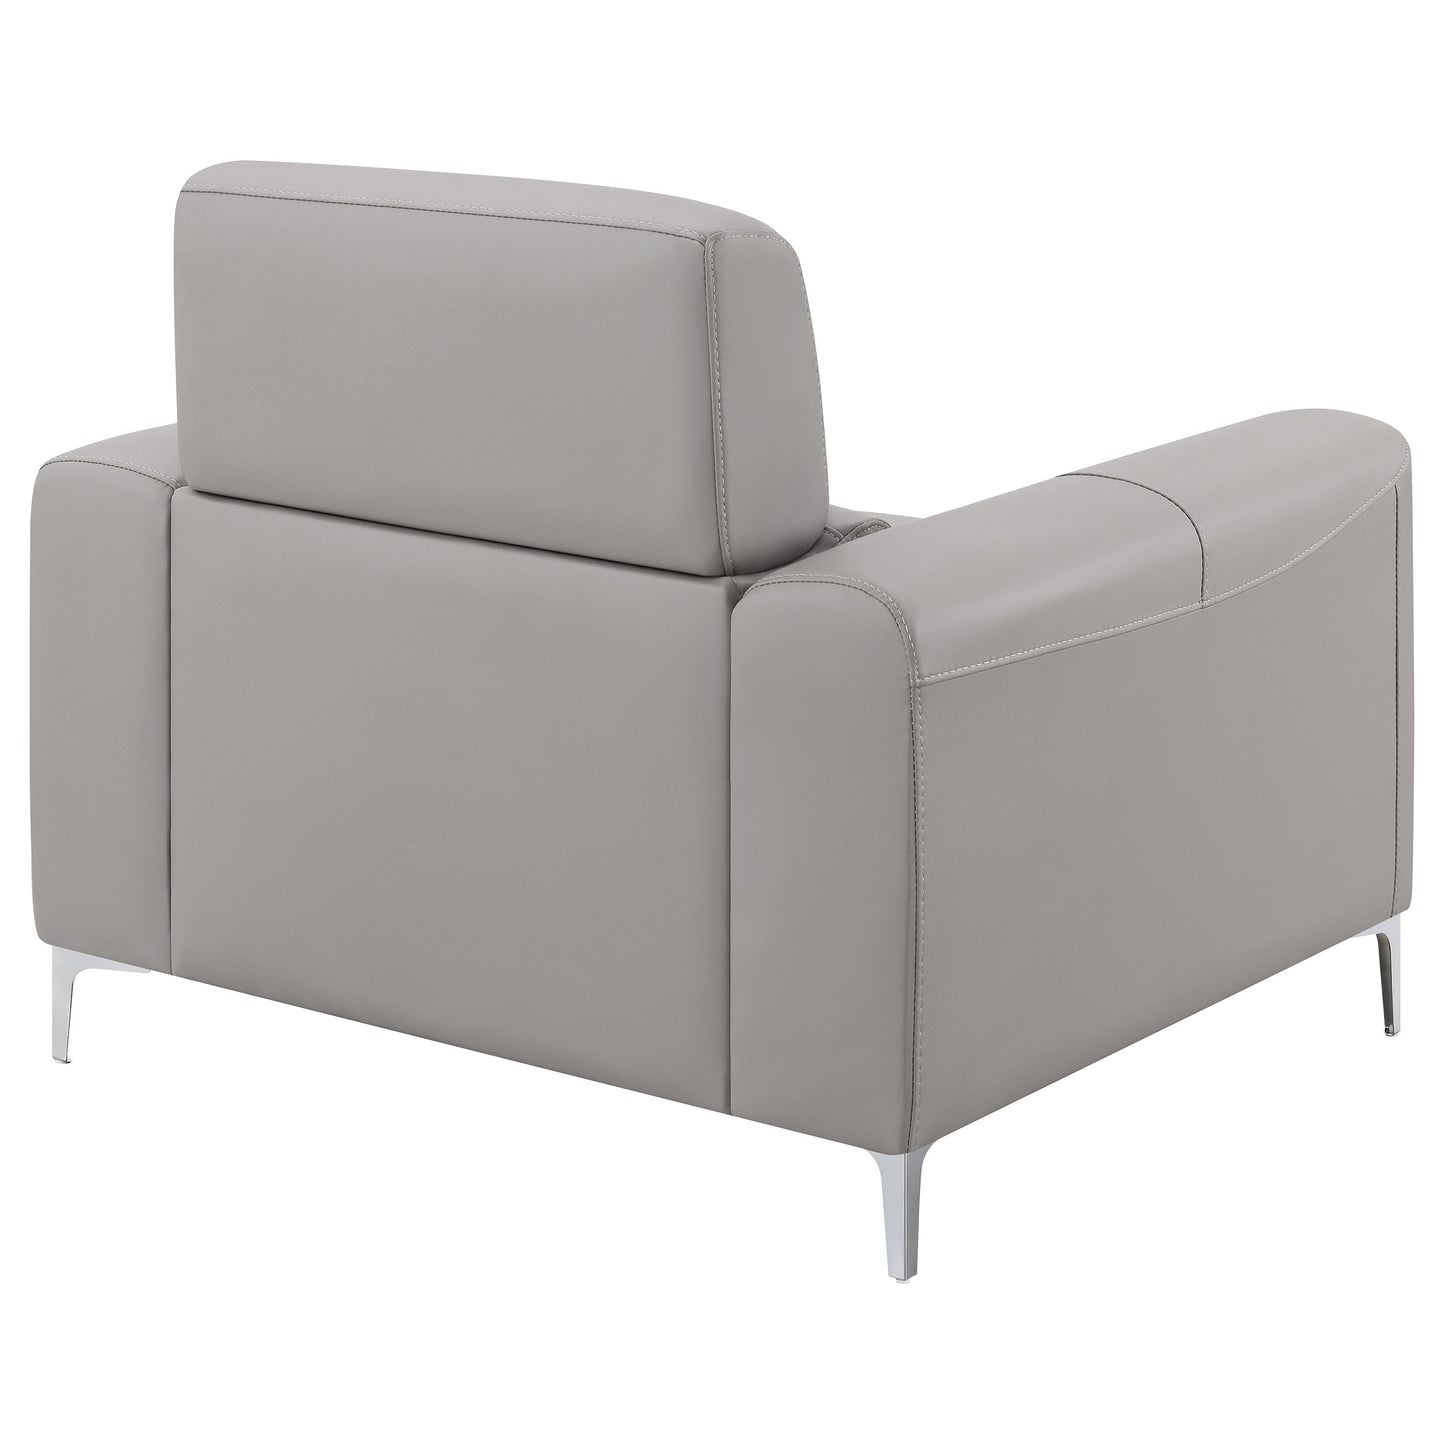 Glenmark Track Arm Upholstered Chair Taupe